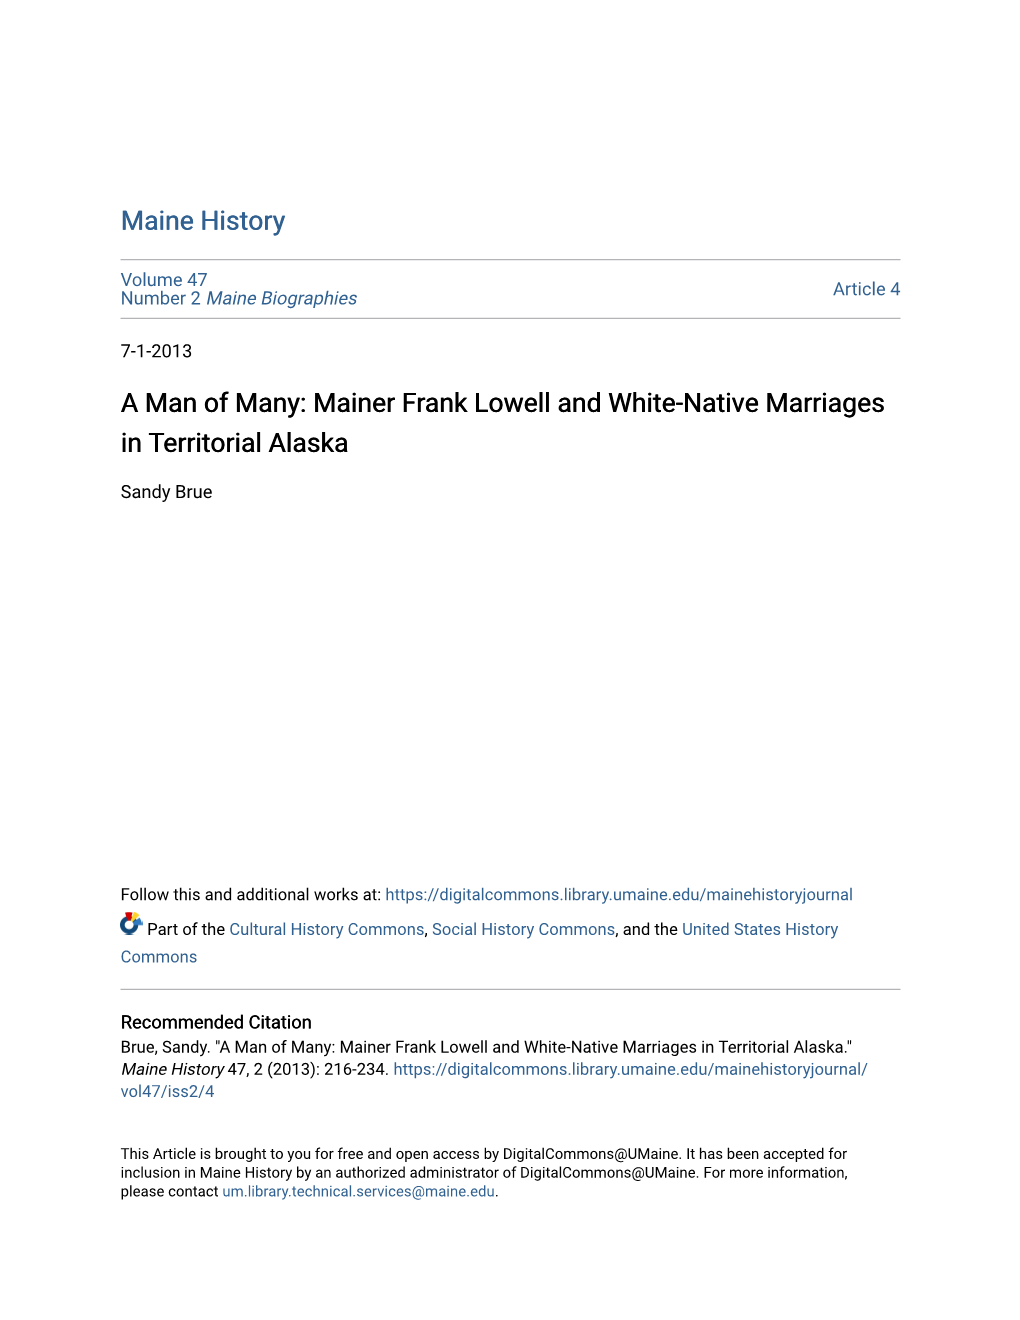 A Man of Many: Mainer Frank Lowell and White-Native Marriages in Territorial Alaska